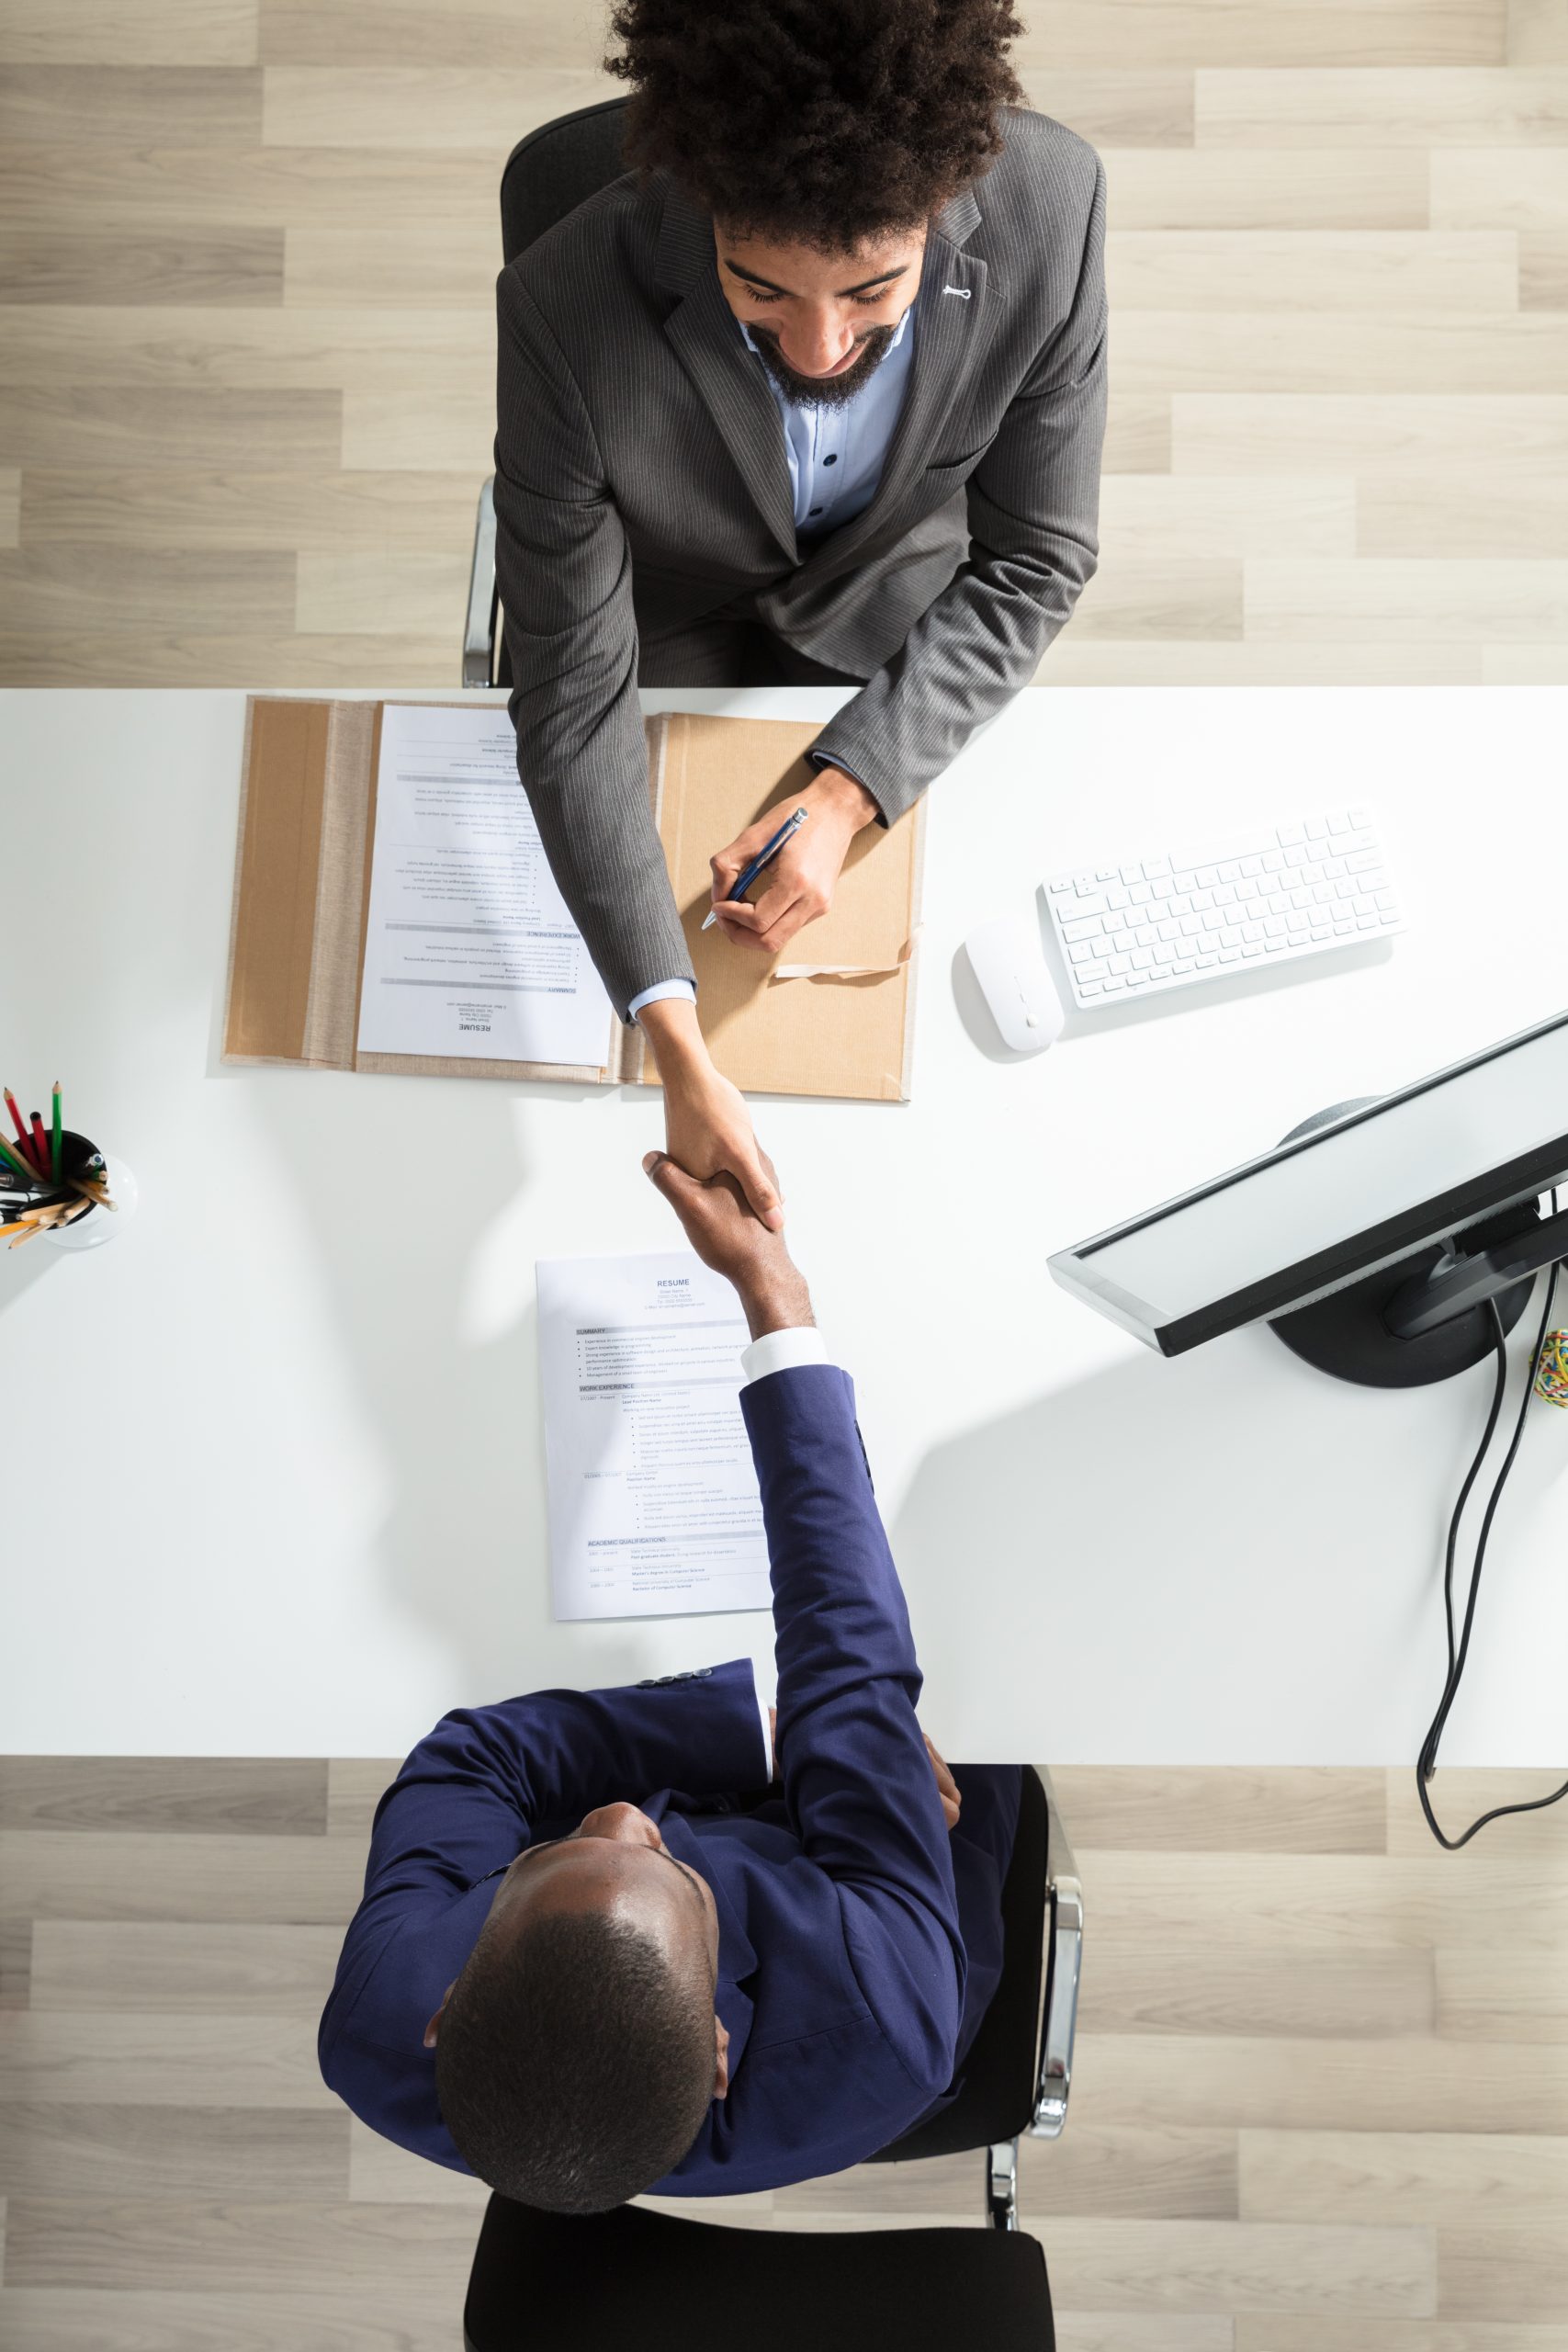 Two professional consulting services businessmen shaking hands over a desk, one standing and the other sitting, with documents in between them. View from above.